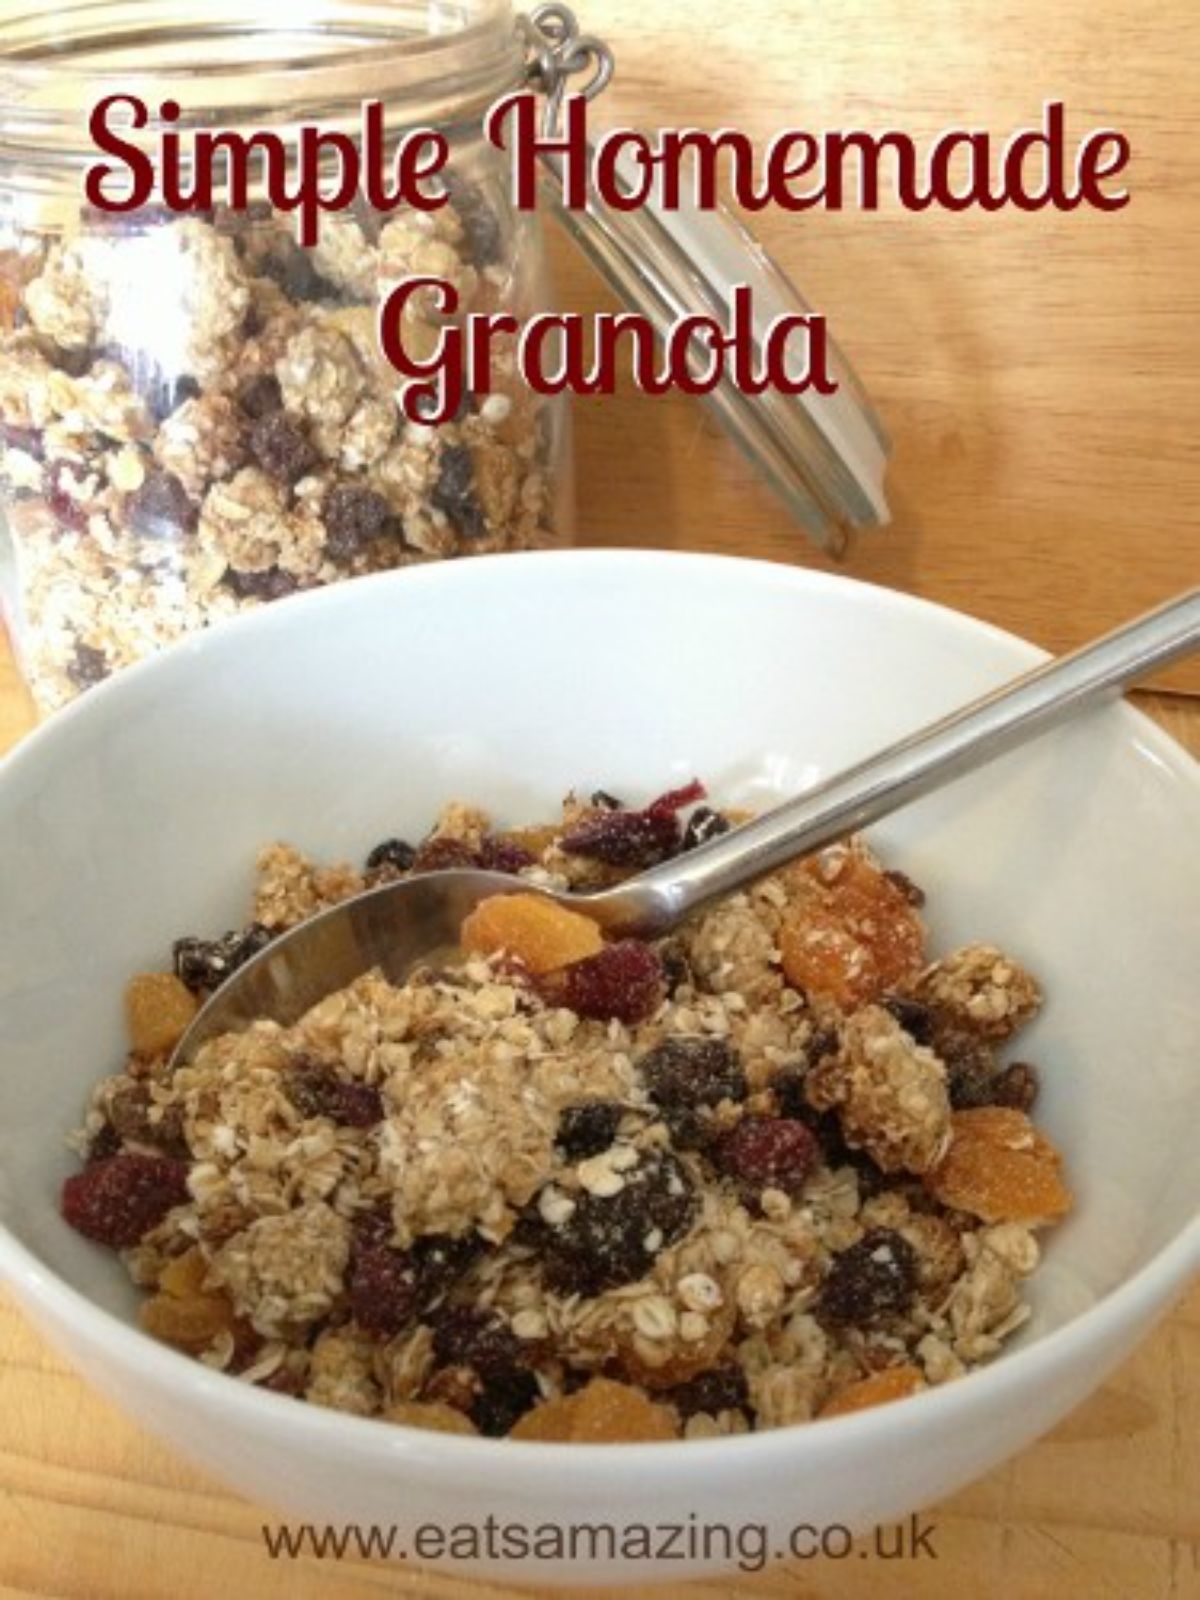 the text reasd "simple homemade granola" the image is of a bowl full of granola with a spoon in it